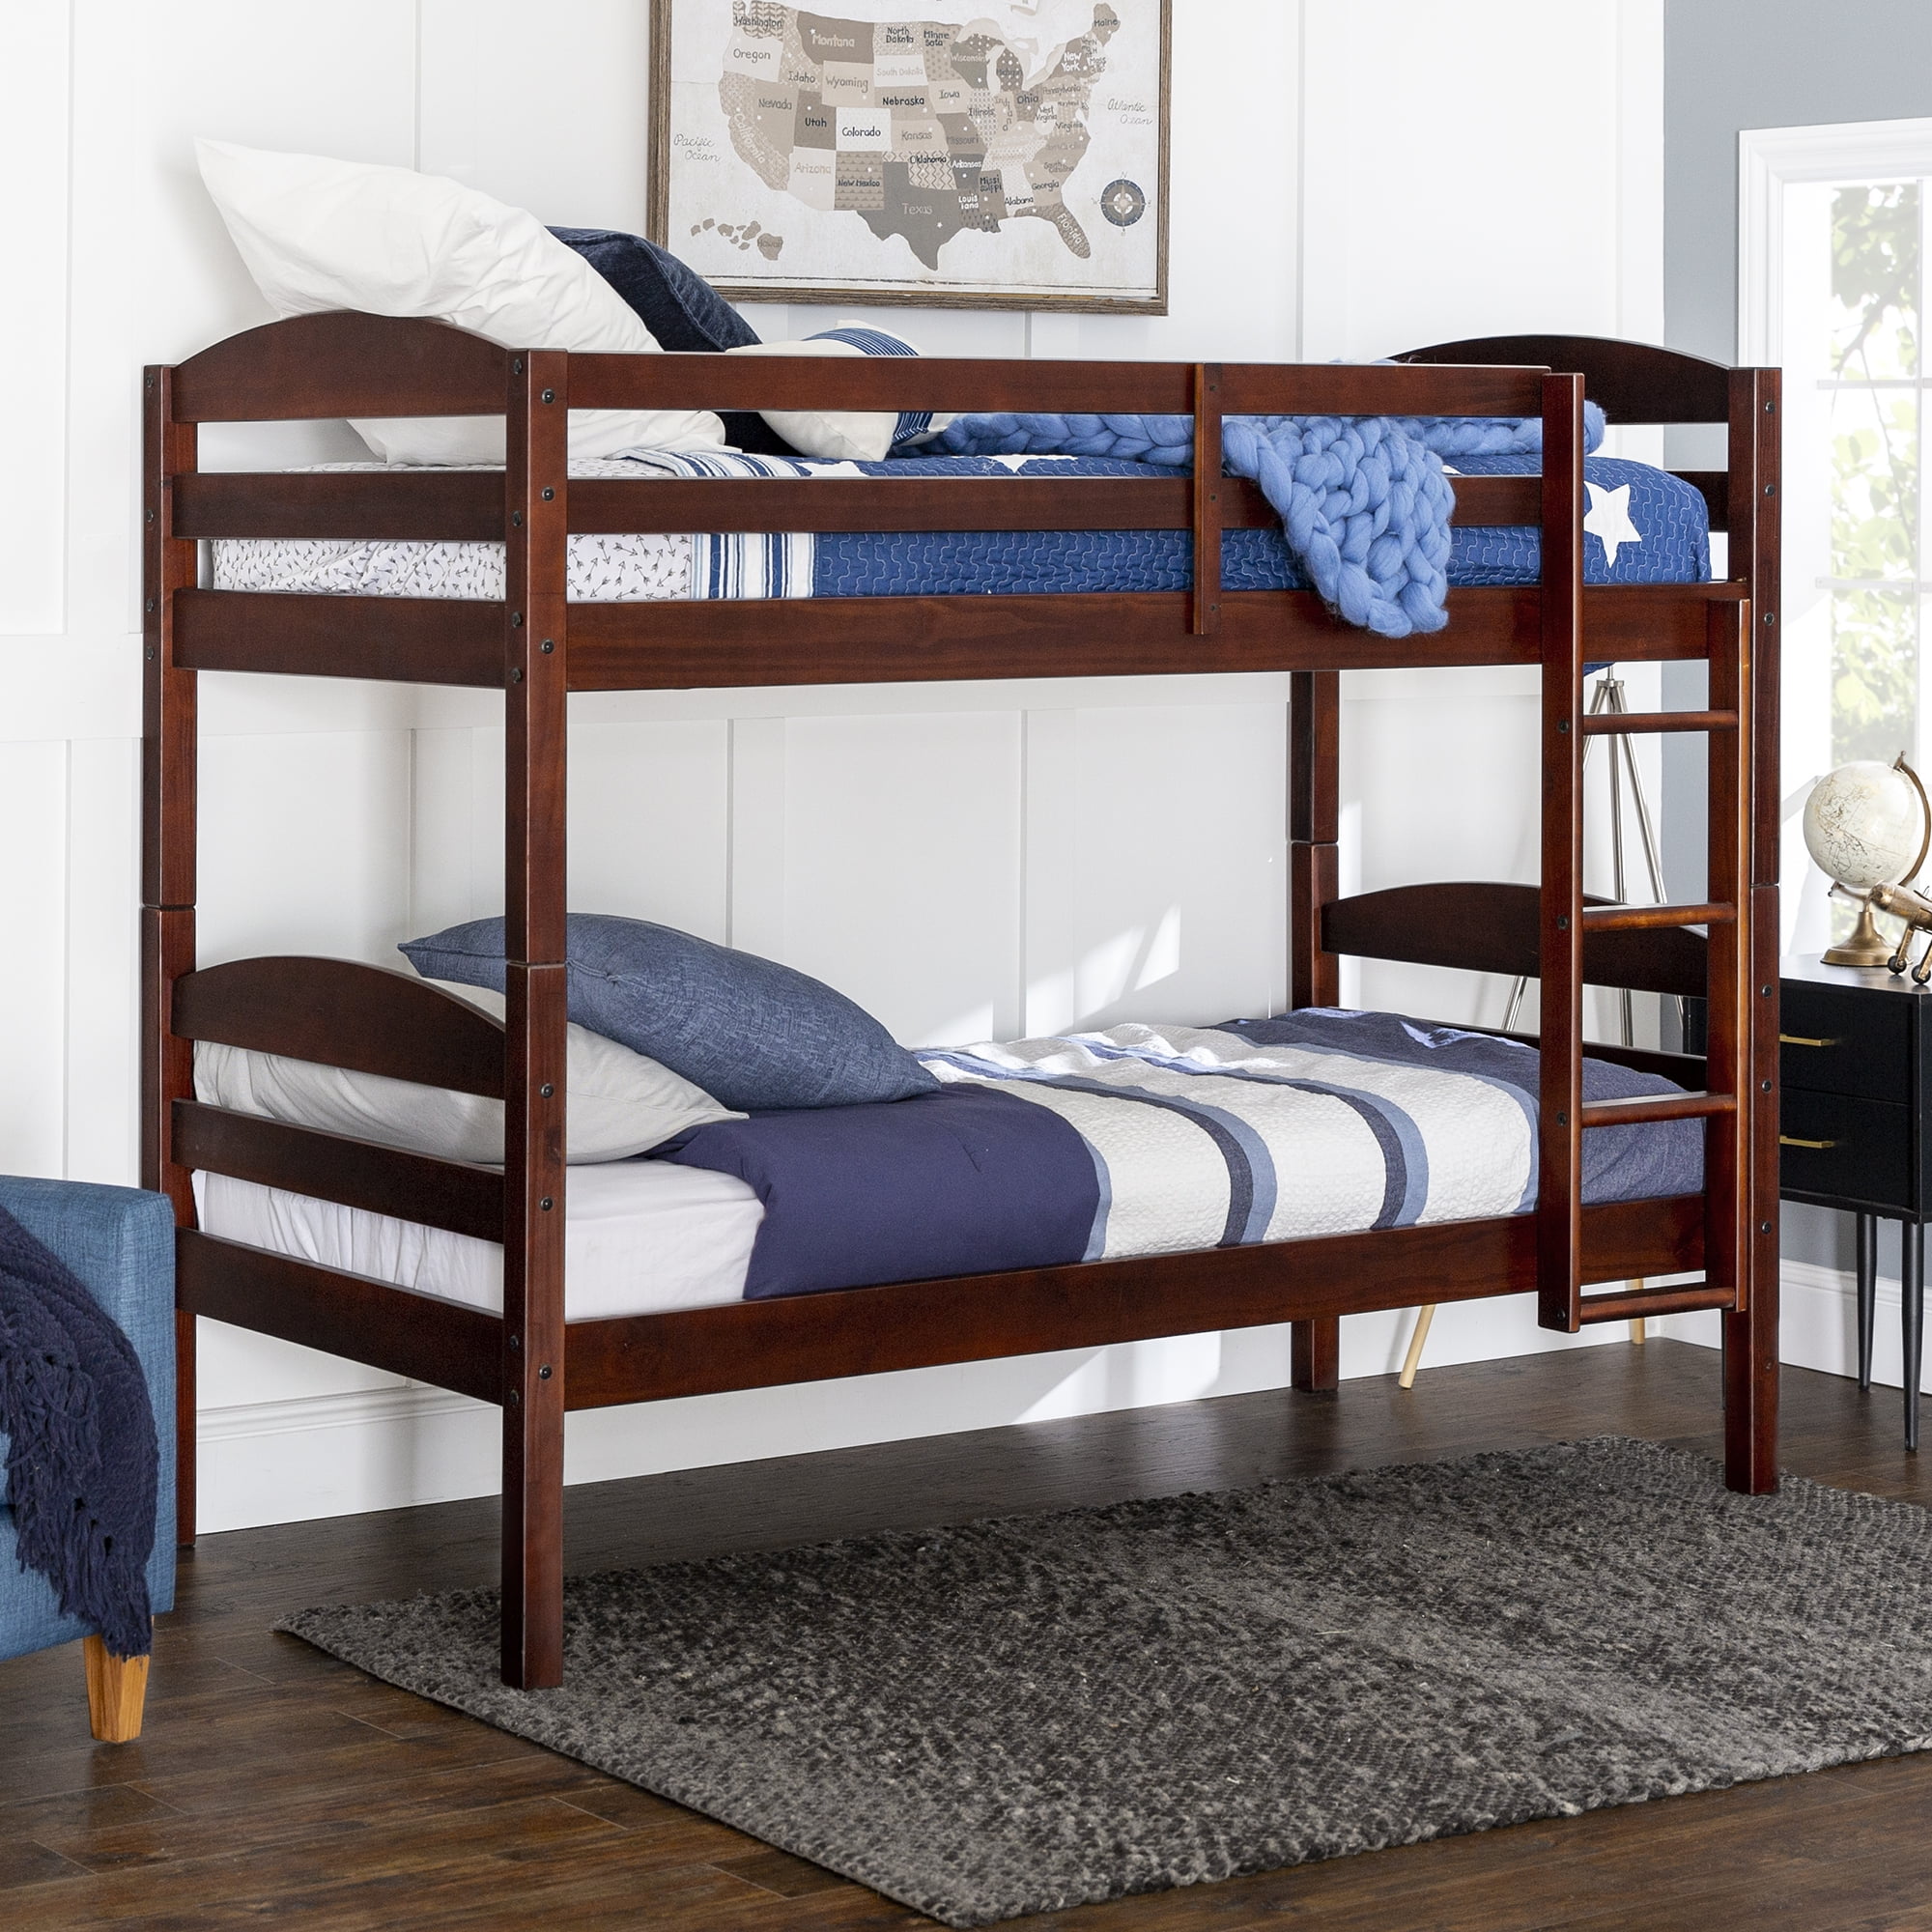 Walker Edison Solid Wood Twin Over, Walker Edison Twin Over Full Bunk Bed